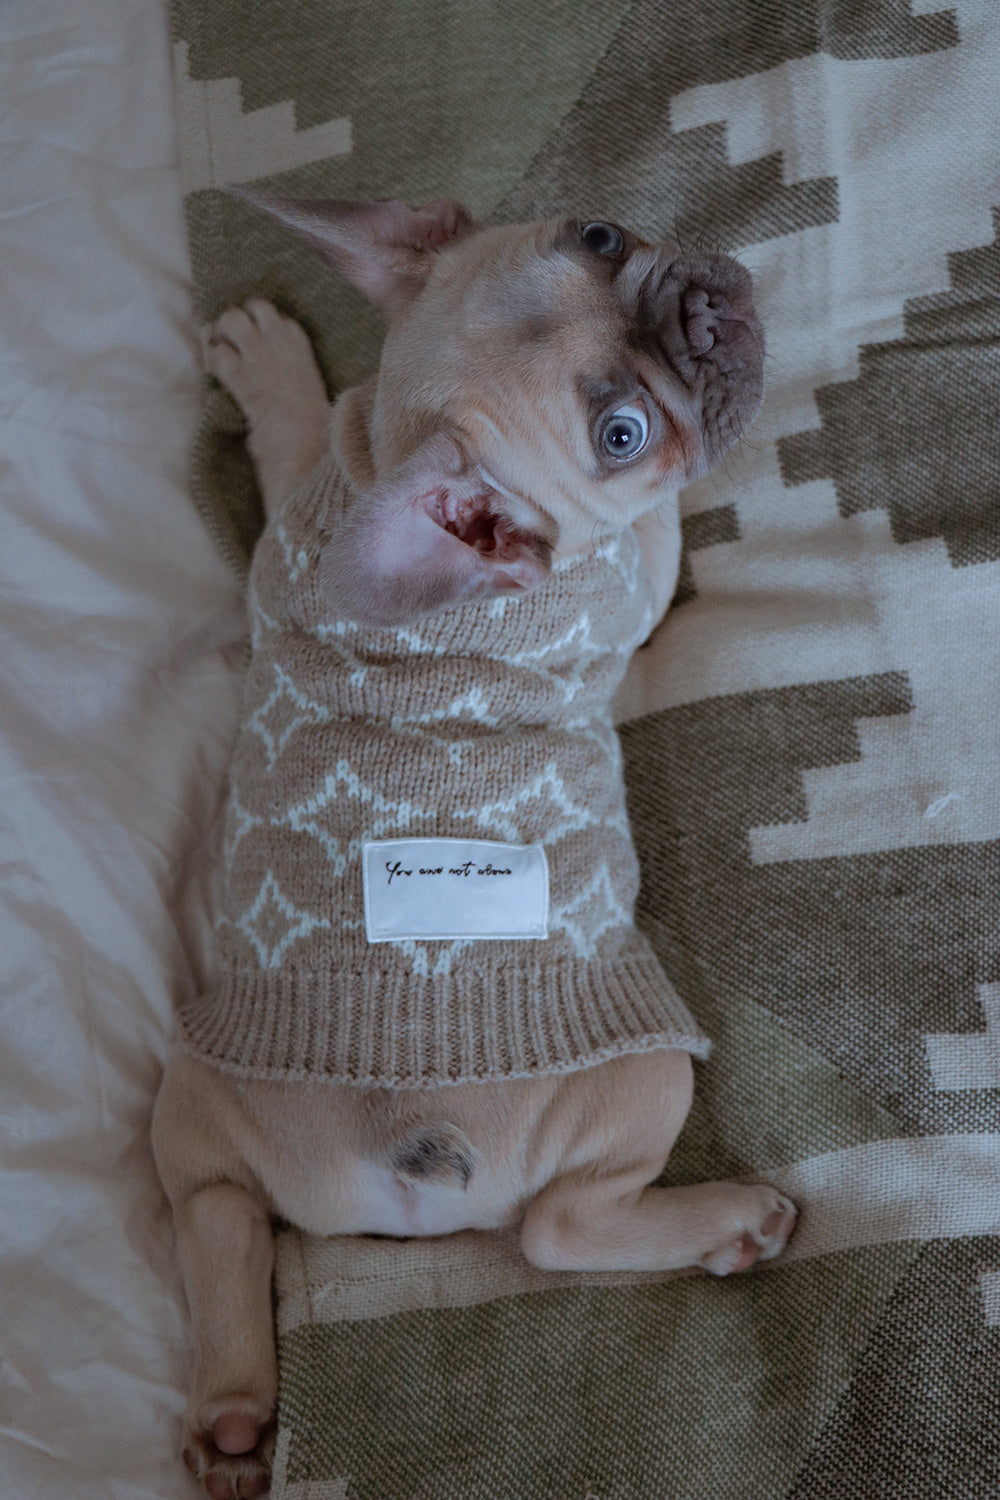 A dog with an OverGlam jumper laying in a bed